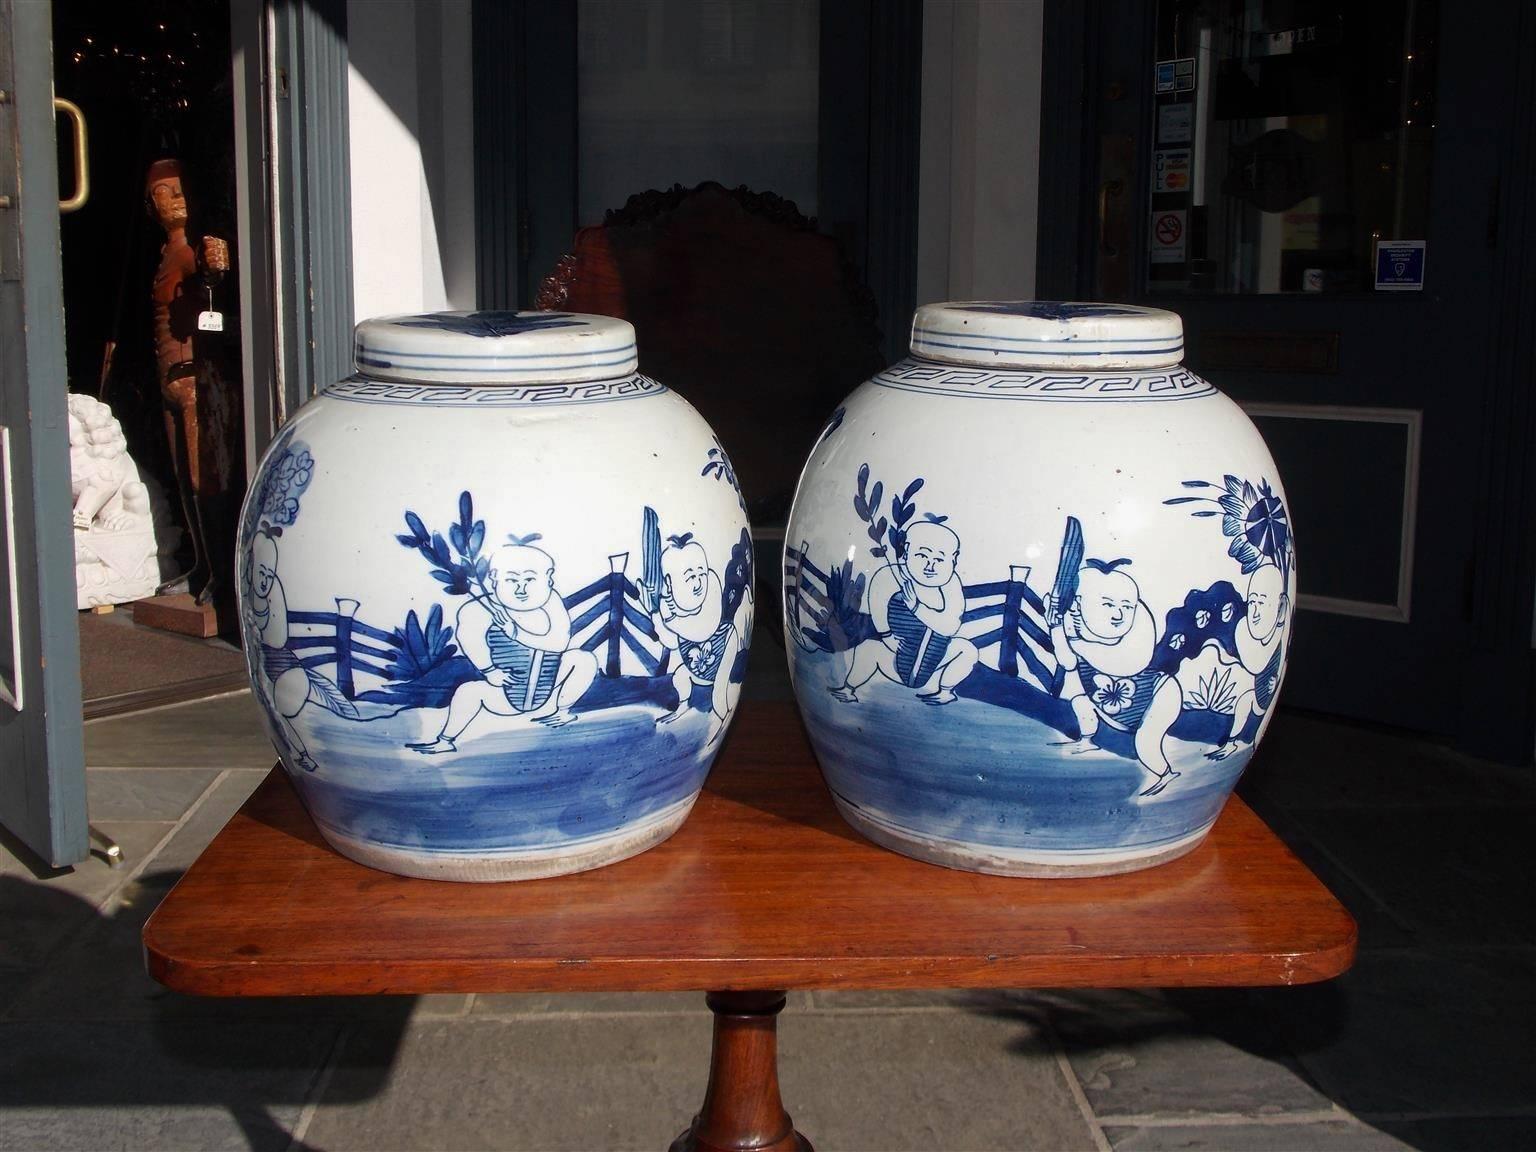 Pair of Chinese blue and white porcelain glazed decorative figural and floral ginger jars with the original removable lids, 20th century.